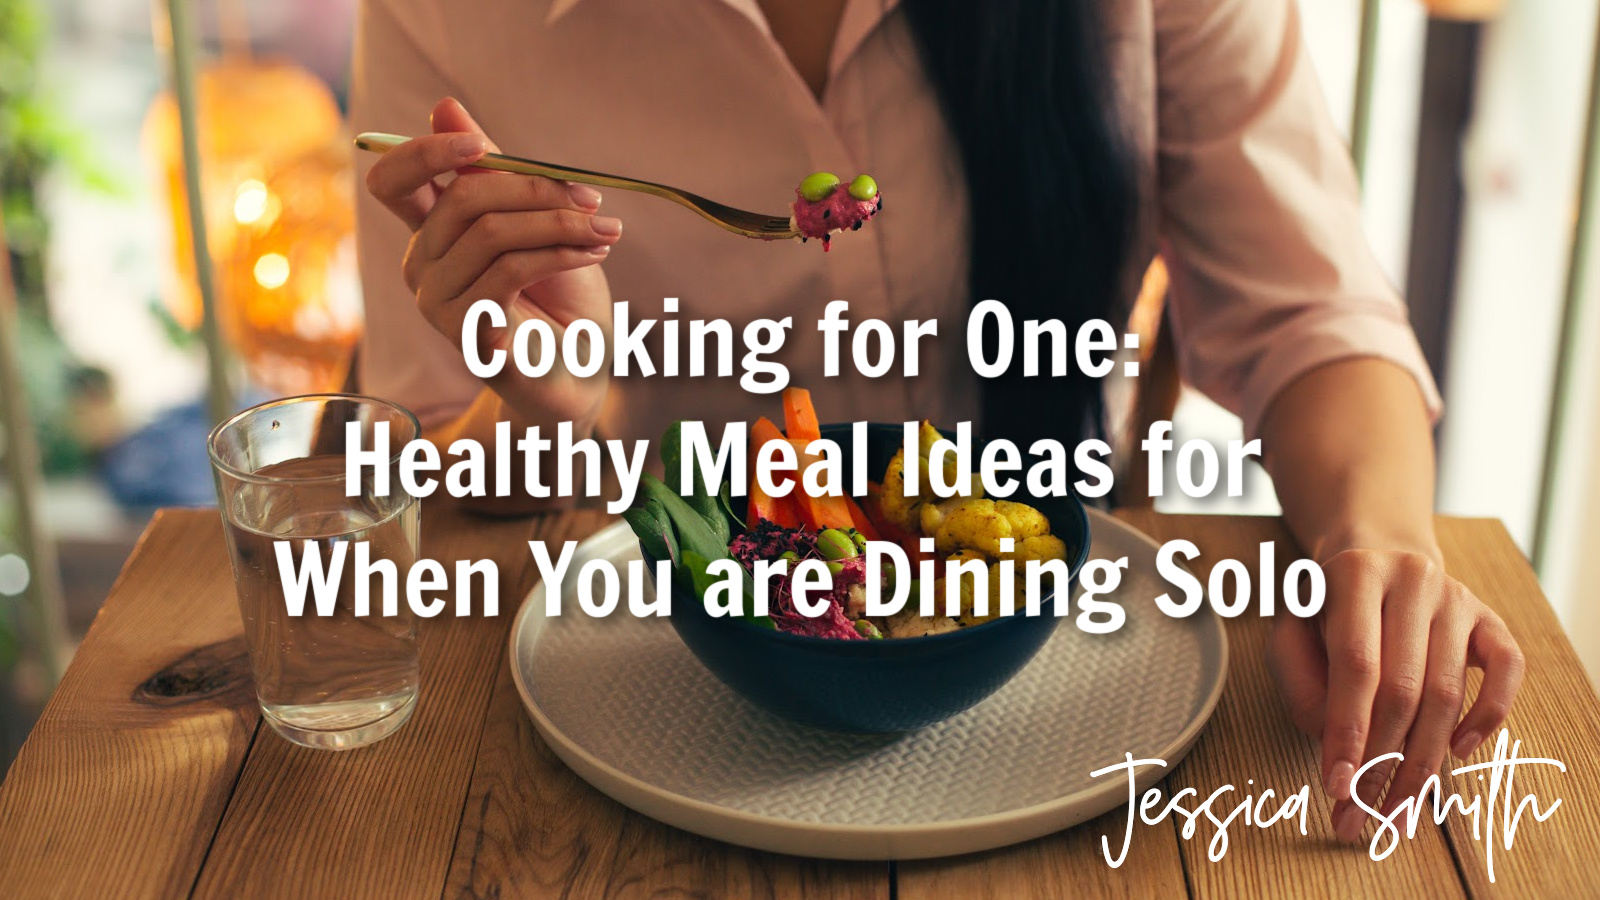 Cooking for One:  Healthy Meal Ideas for  When You are Dining Solo